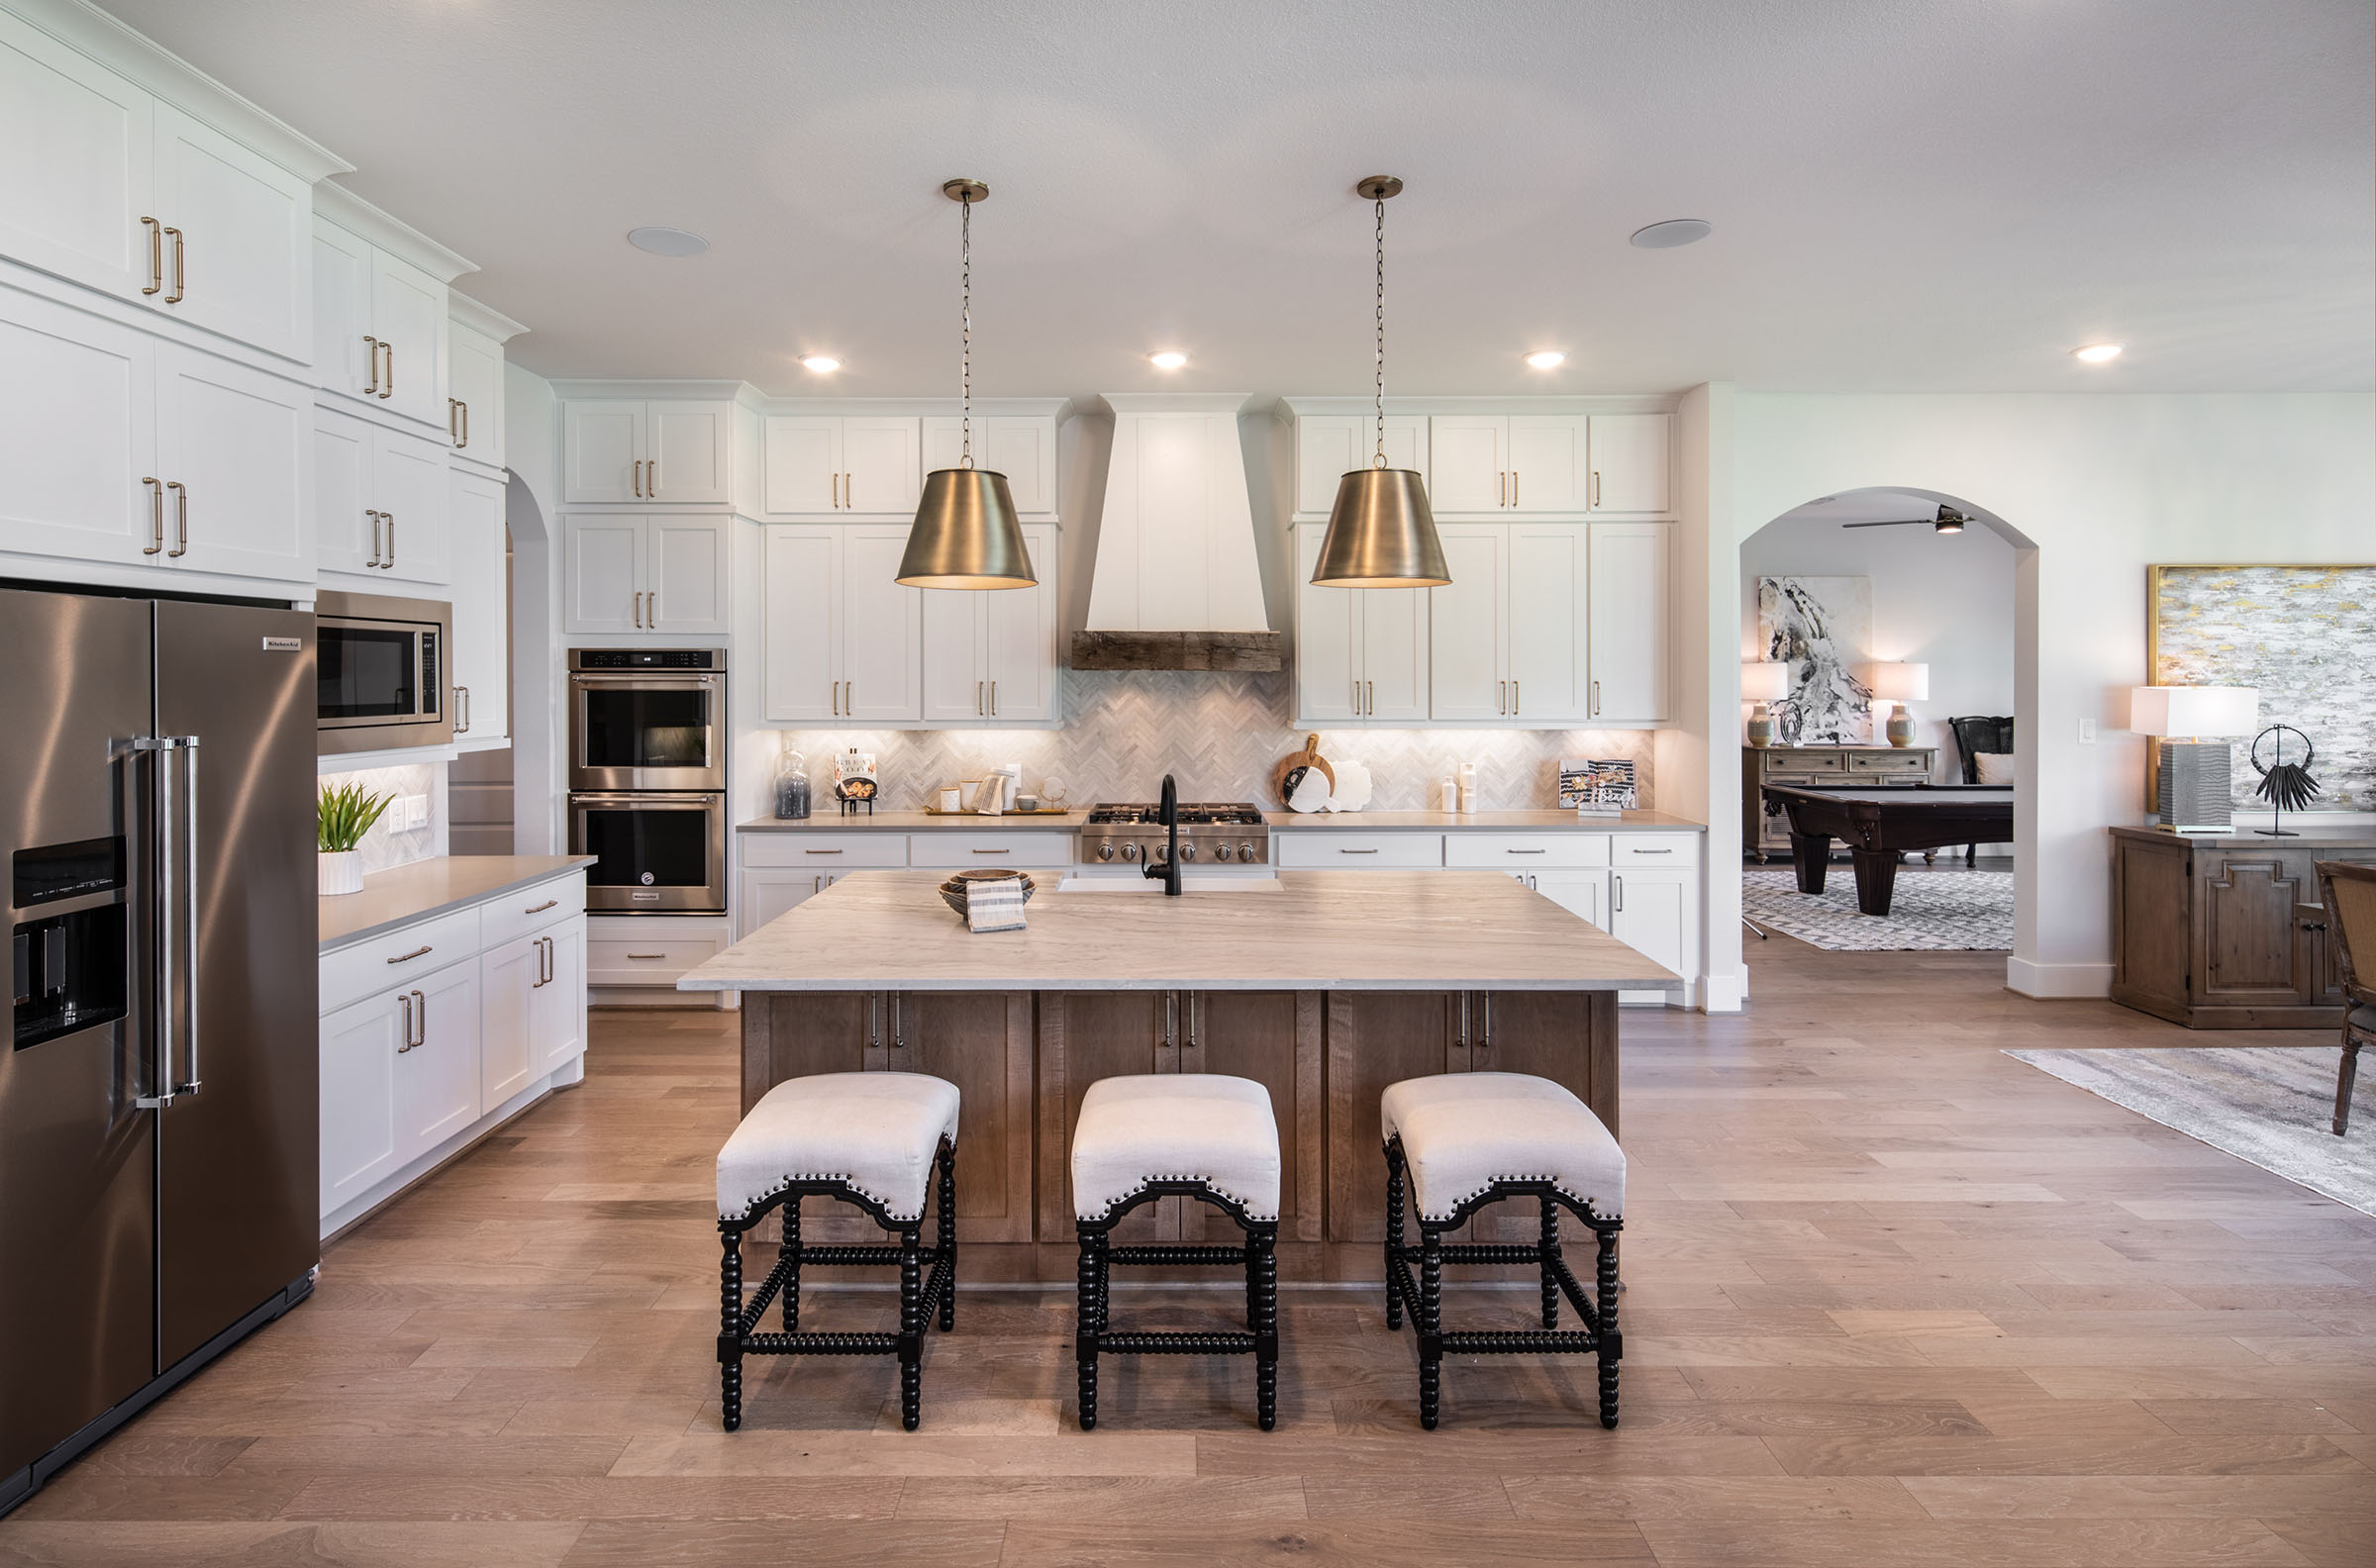 Villages of Cypress Lakes Kitchens Image